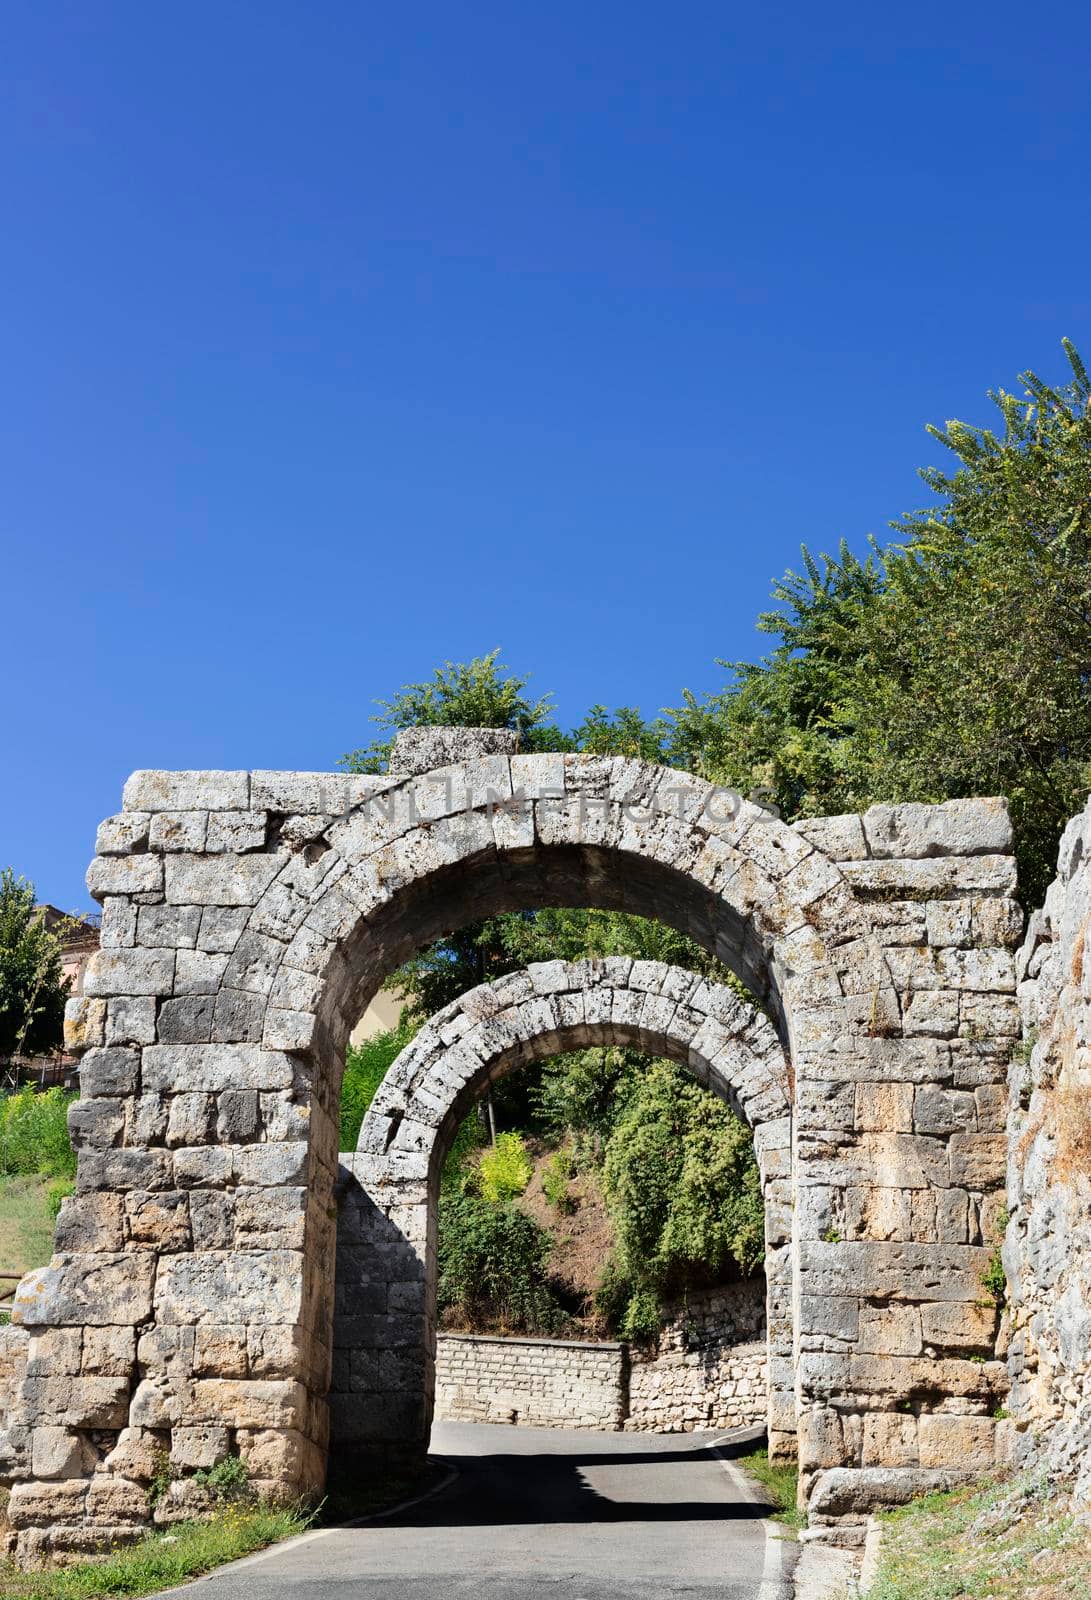 Ancient town of Ferentino , Italy , Porta Casamari , double gate with two round arches constructed of blocks of tuff